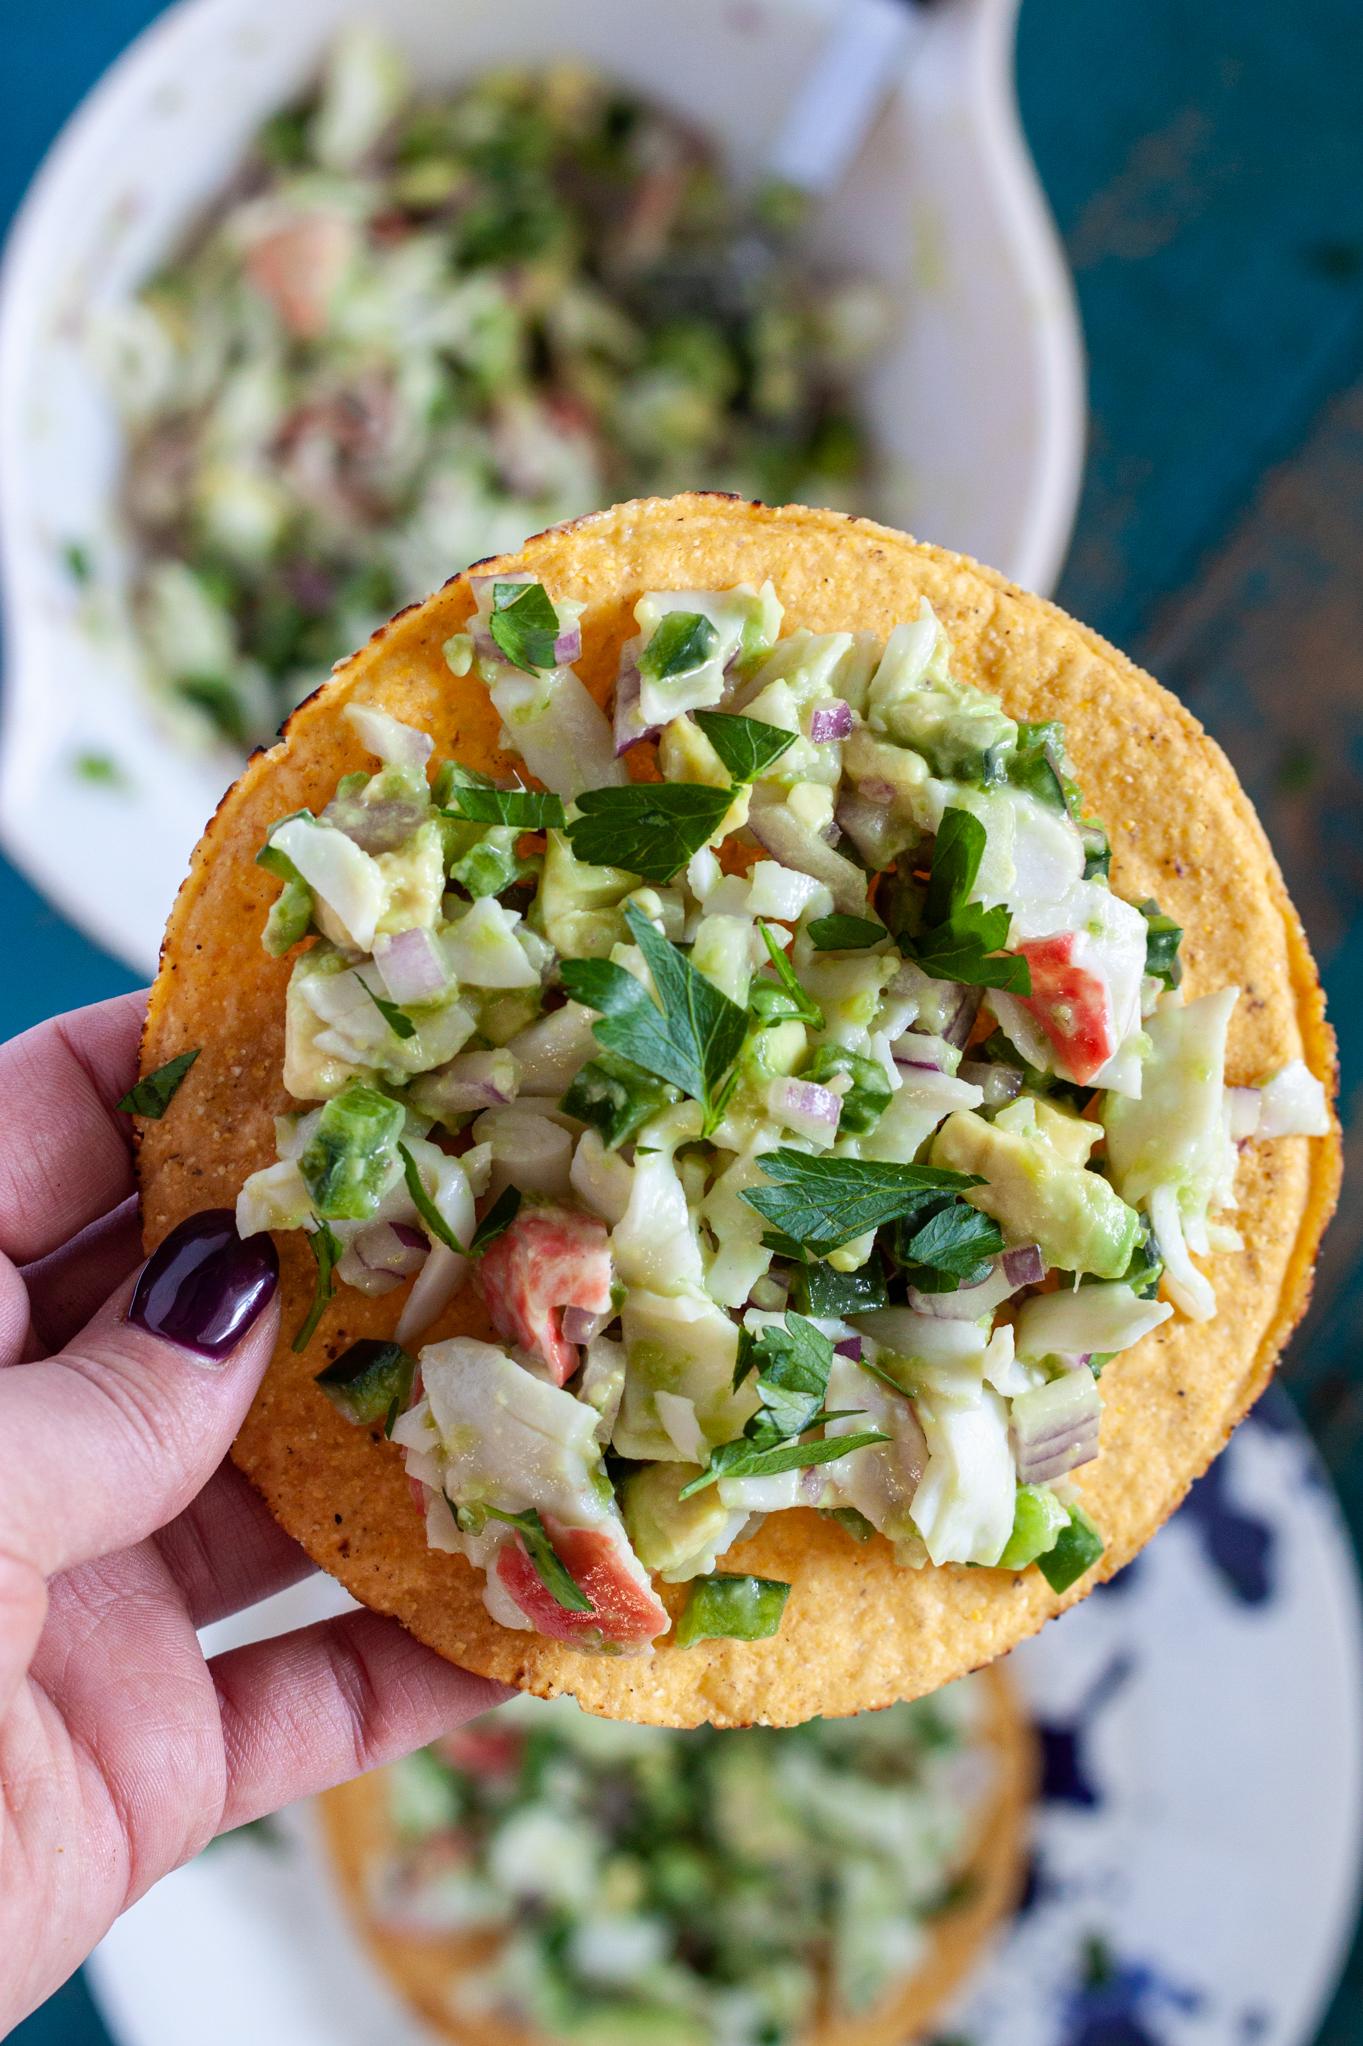  Satisfy your cravings with these refreshing Faux Ceviche Tostadas!